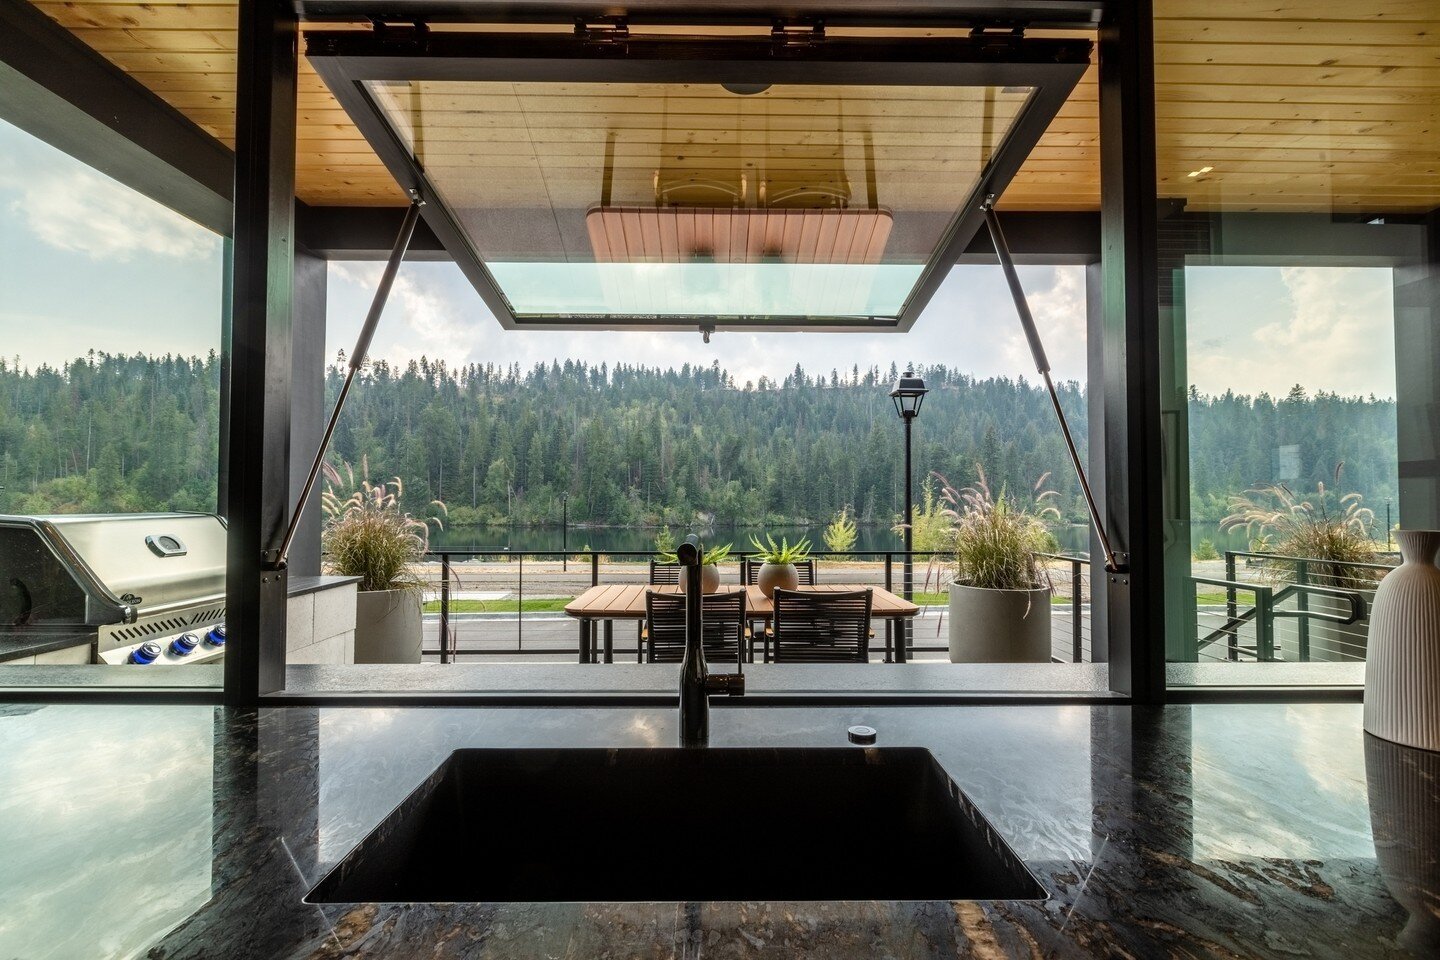 We're ready for a warmer spring in northern Idaho ☀️⁠
⁠
Thankfully our Atlas builds have some of the best views and features to bring mother nature indoors 🪴⁠
⁠
Check out our gallery of completed builds for some home inspo or if you're ready to star